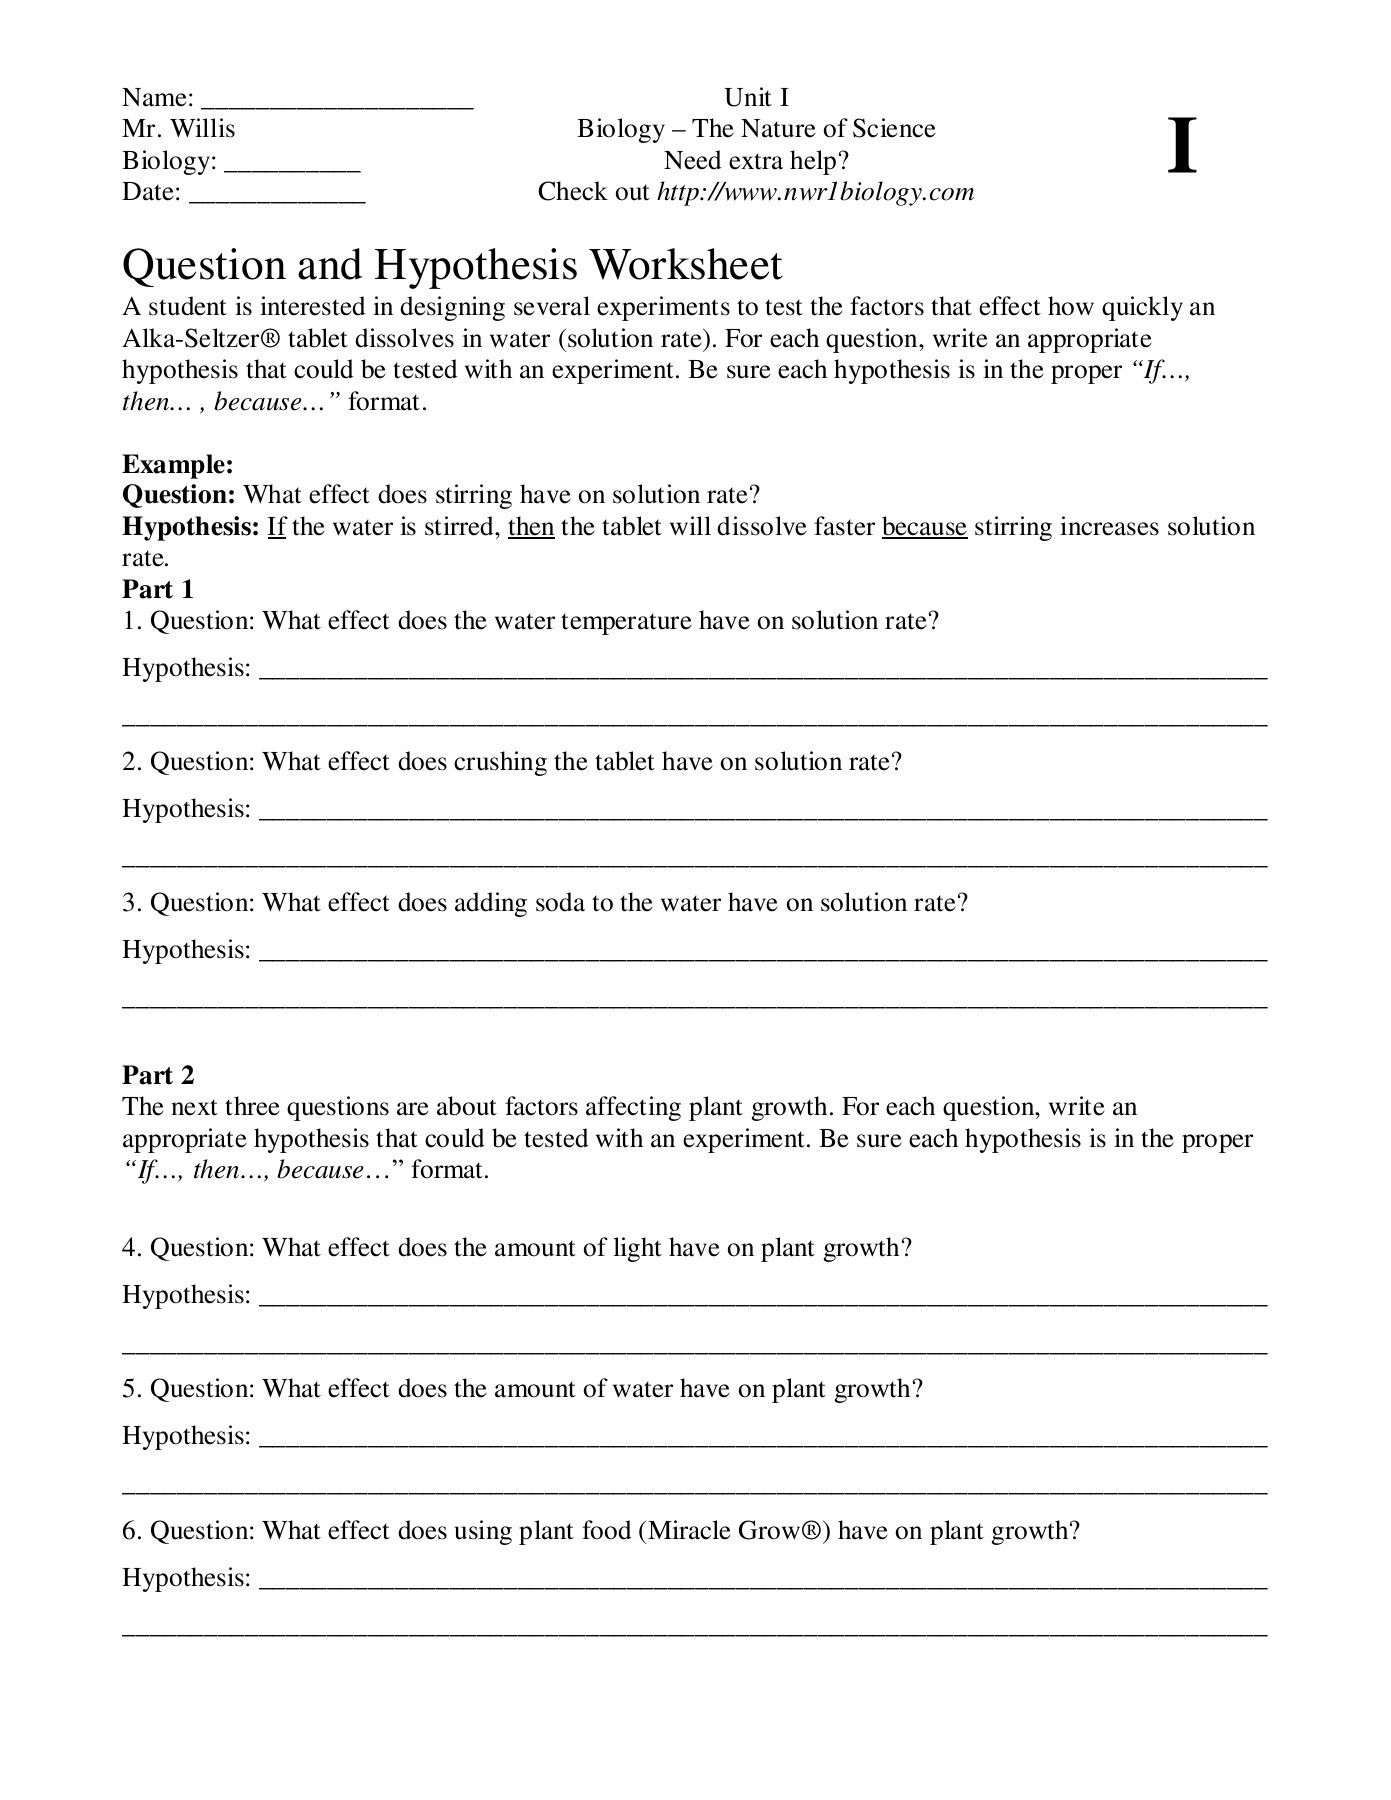 Writing A Hypothesis Worksheet Hypothisisworksheetday2 Pages 1 3 Text Version